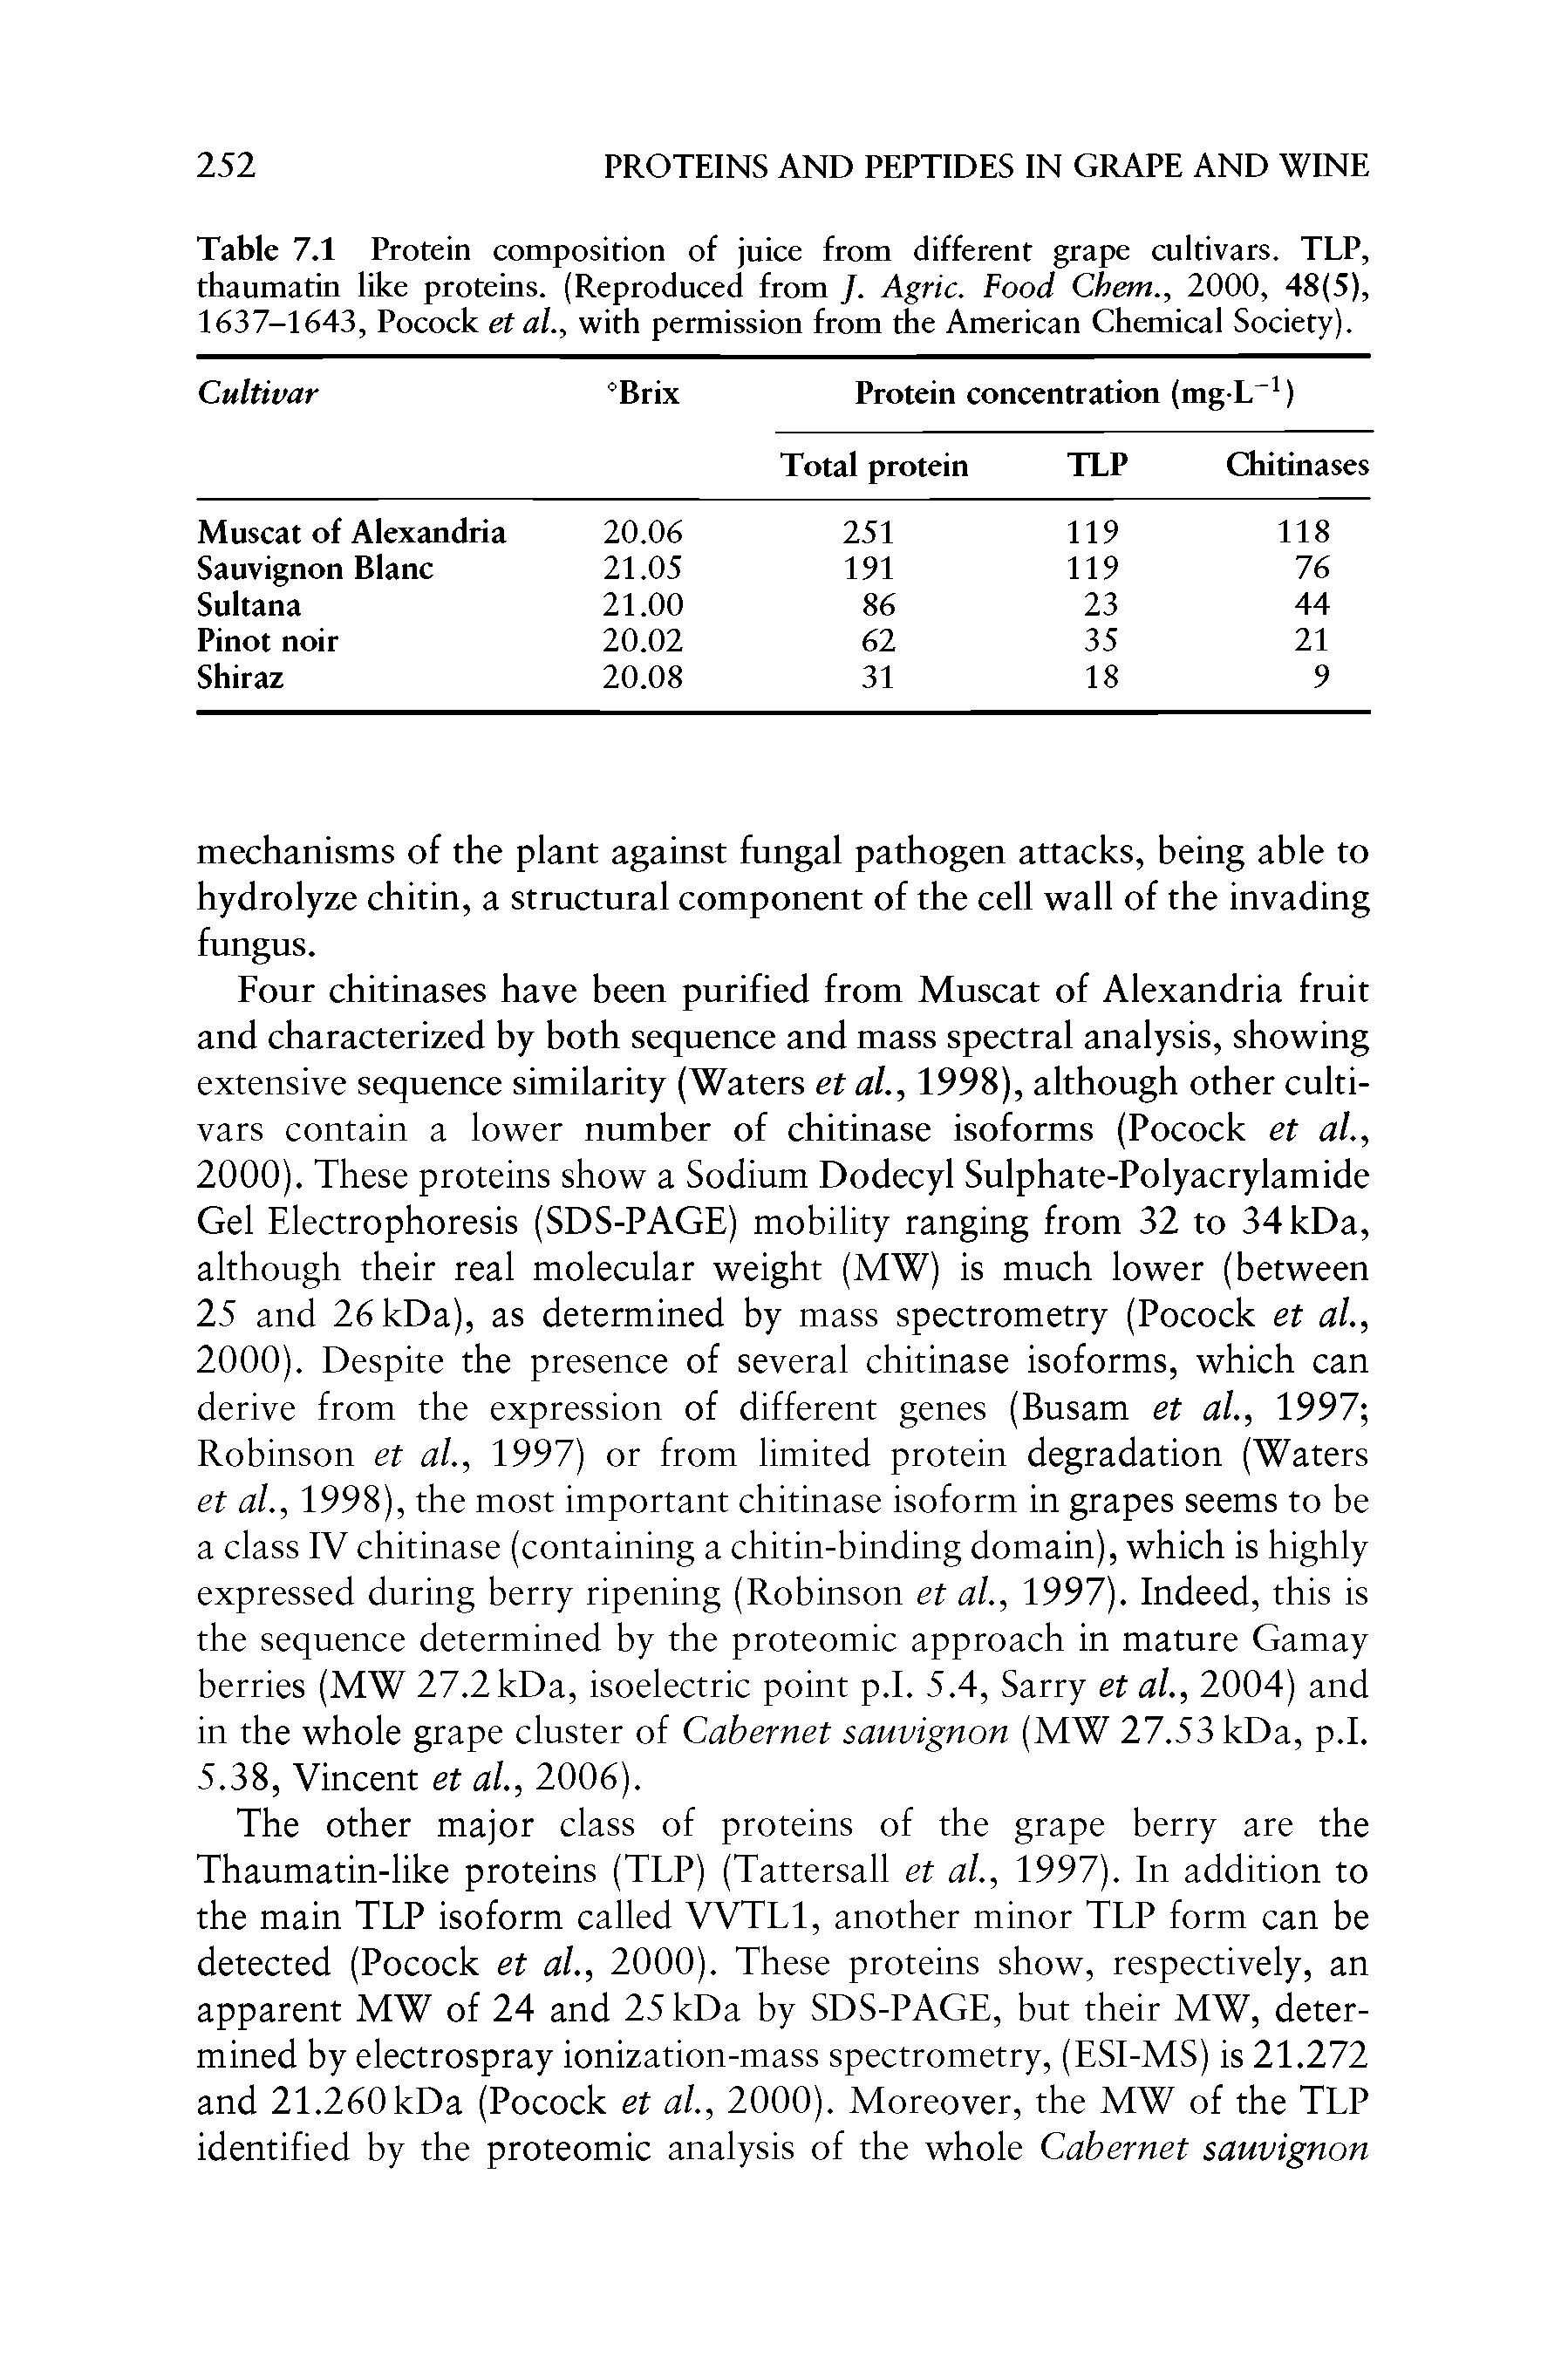 Table 7.1 Protein composition of juice from different grape cultivars. TLP, thaumatin like proteins. (Reproduced from J. Agric. Food Chem., 2000, 48(5), 1637-1643, Pocock et al., with permission from the American Chemical Society).